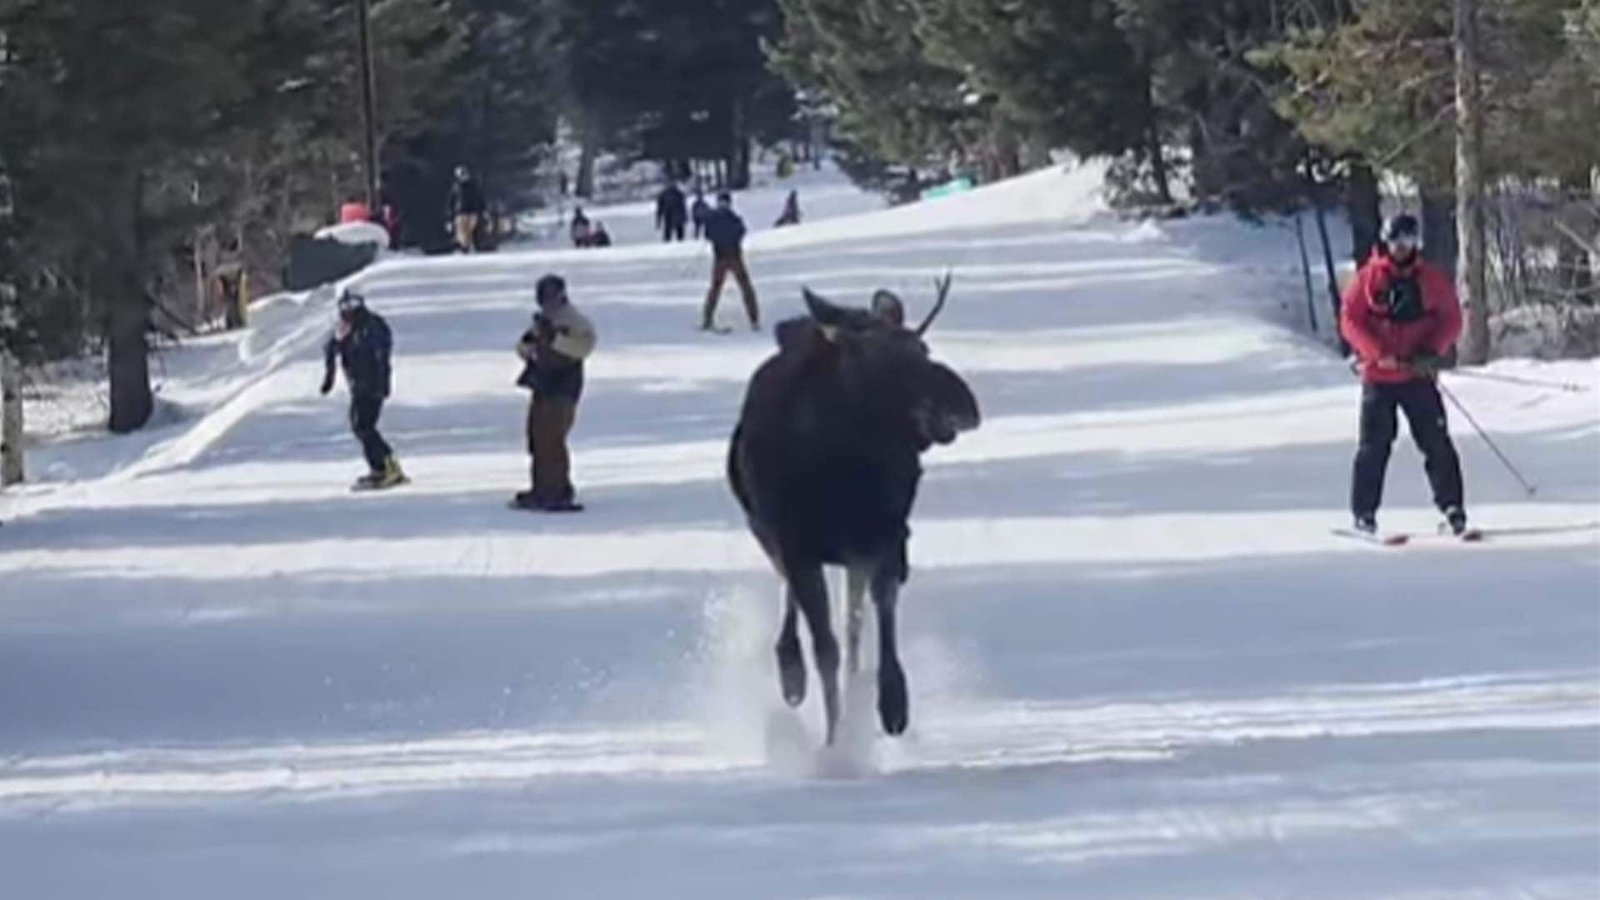 #TheMoment a moose chased skiers down a mountain in Wyoming